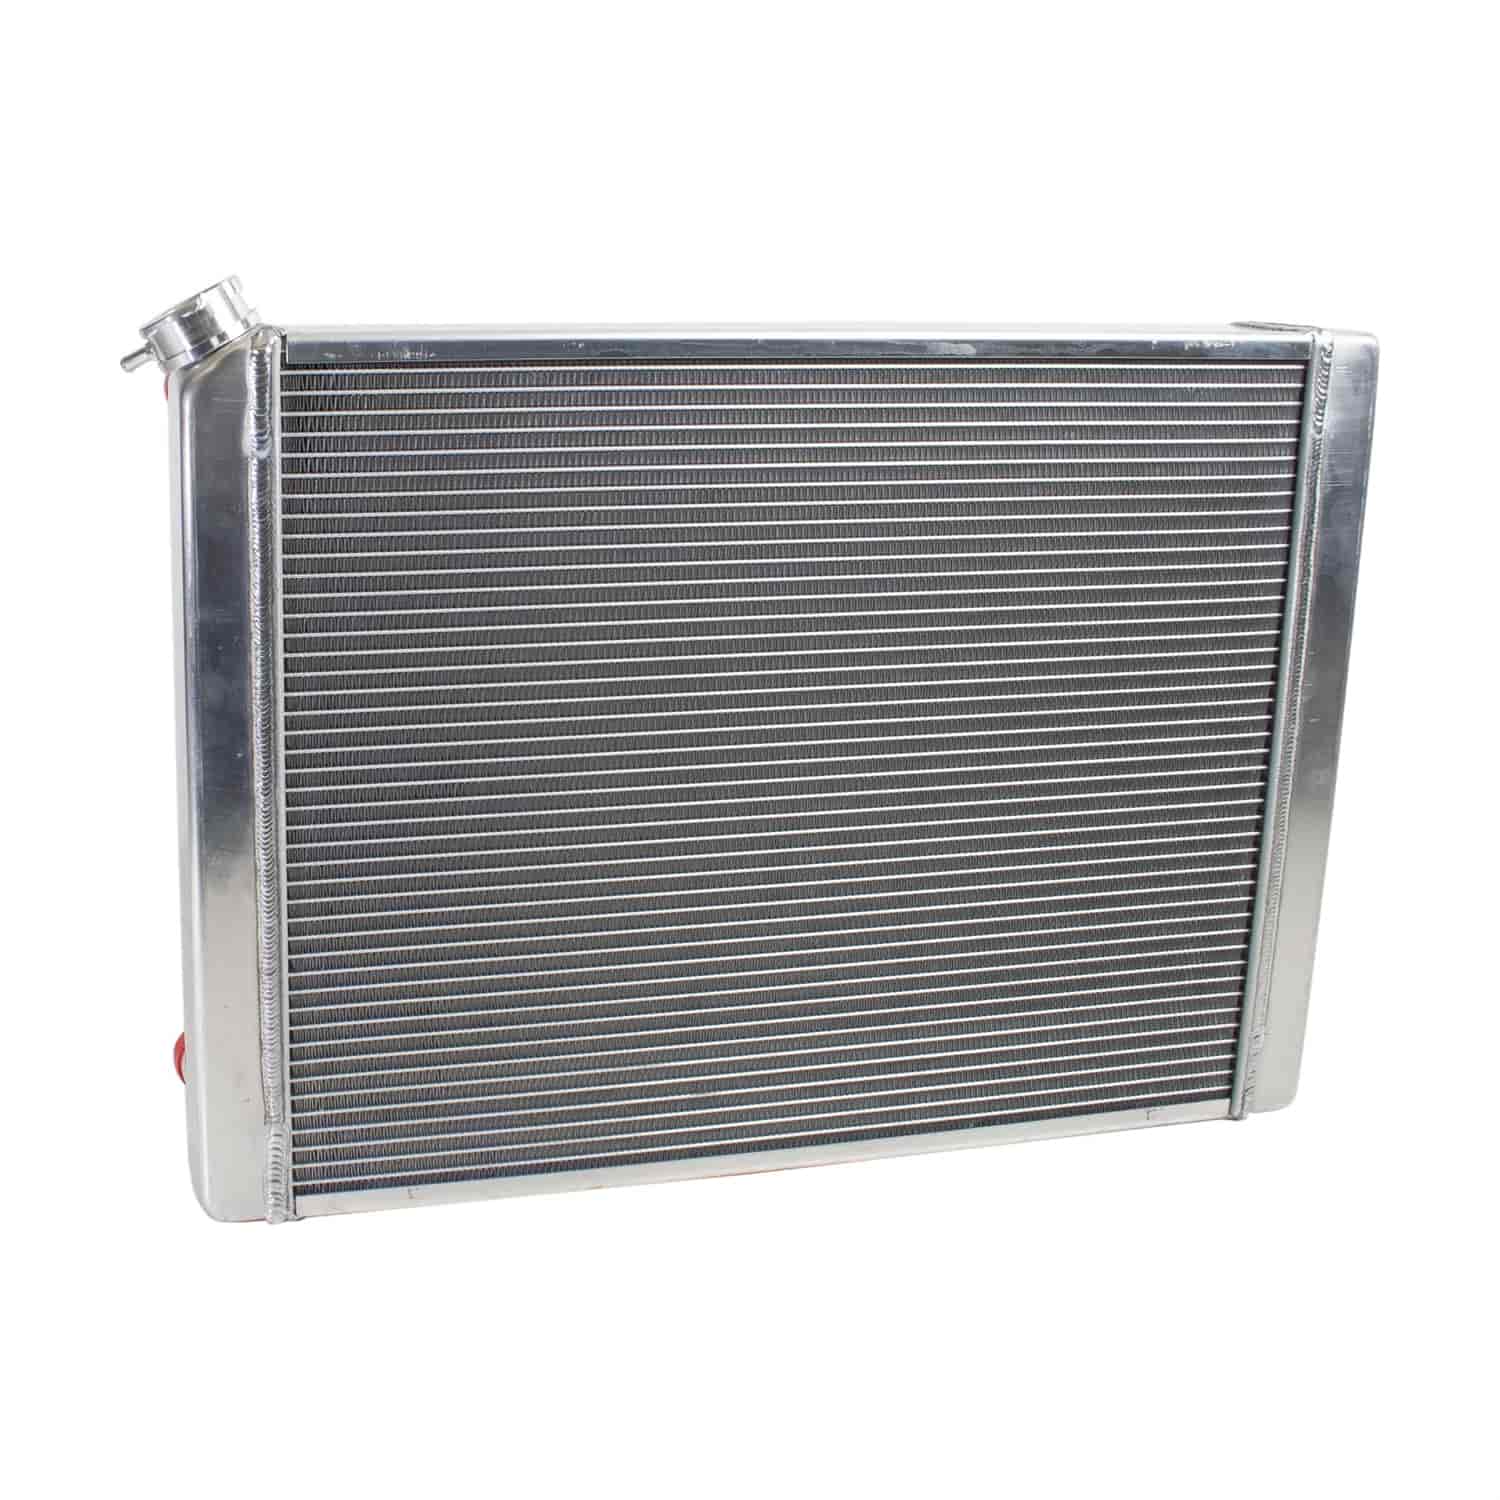 PerformanceFit Radiator for LS Swap GM 1968-1979 X Body with Transmission Cooler